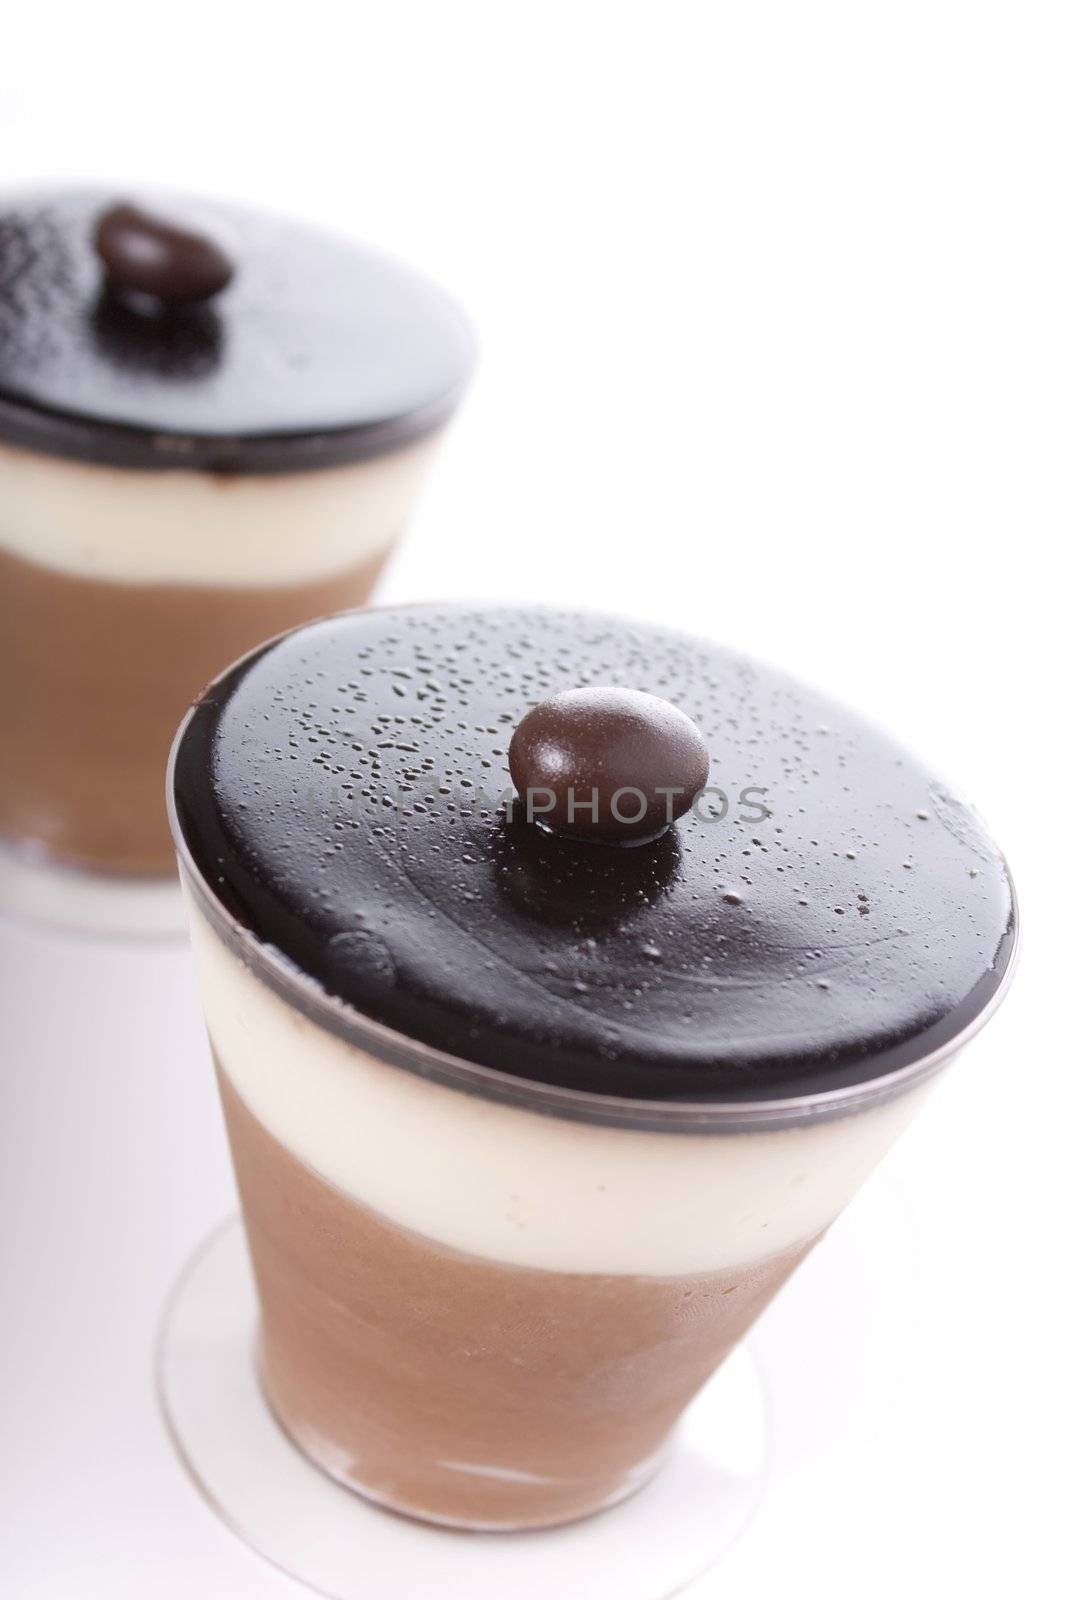 Chocolate and cream dessert in a plastic cup,  topped with dark chocolate and a chocolate covered coffee bean.